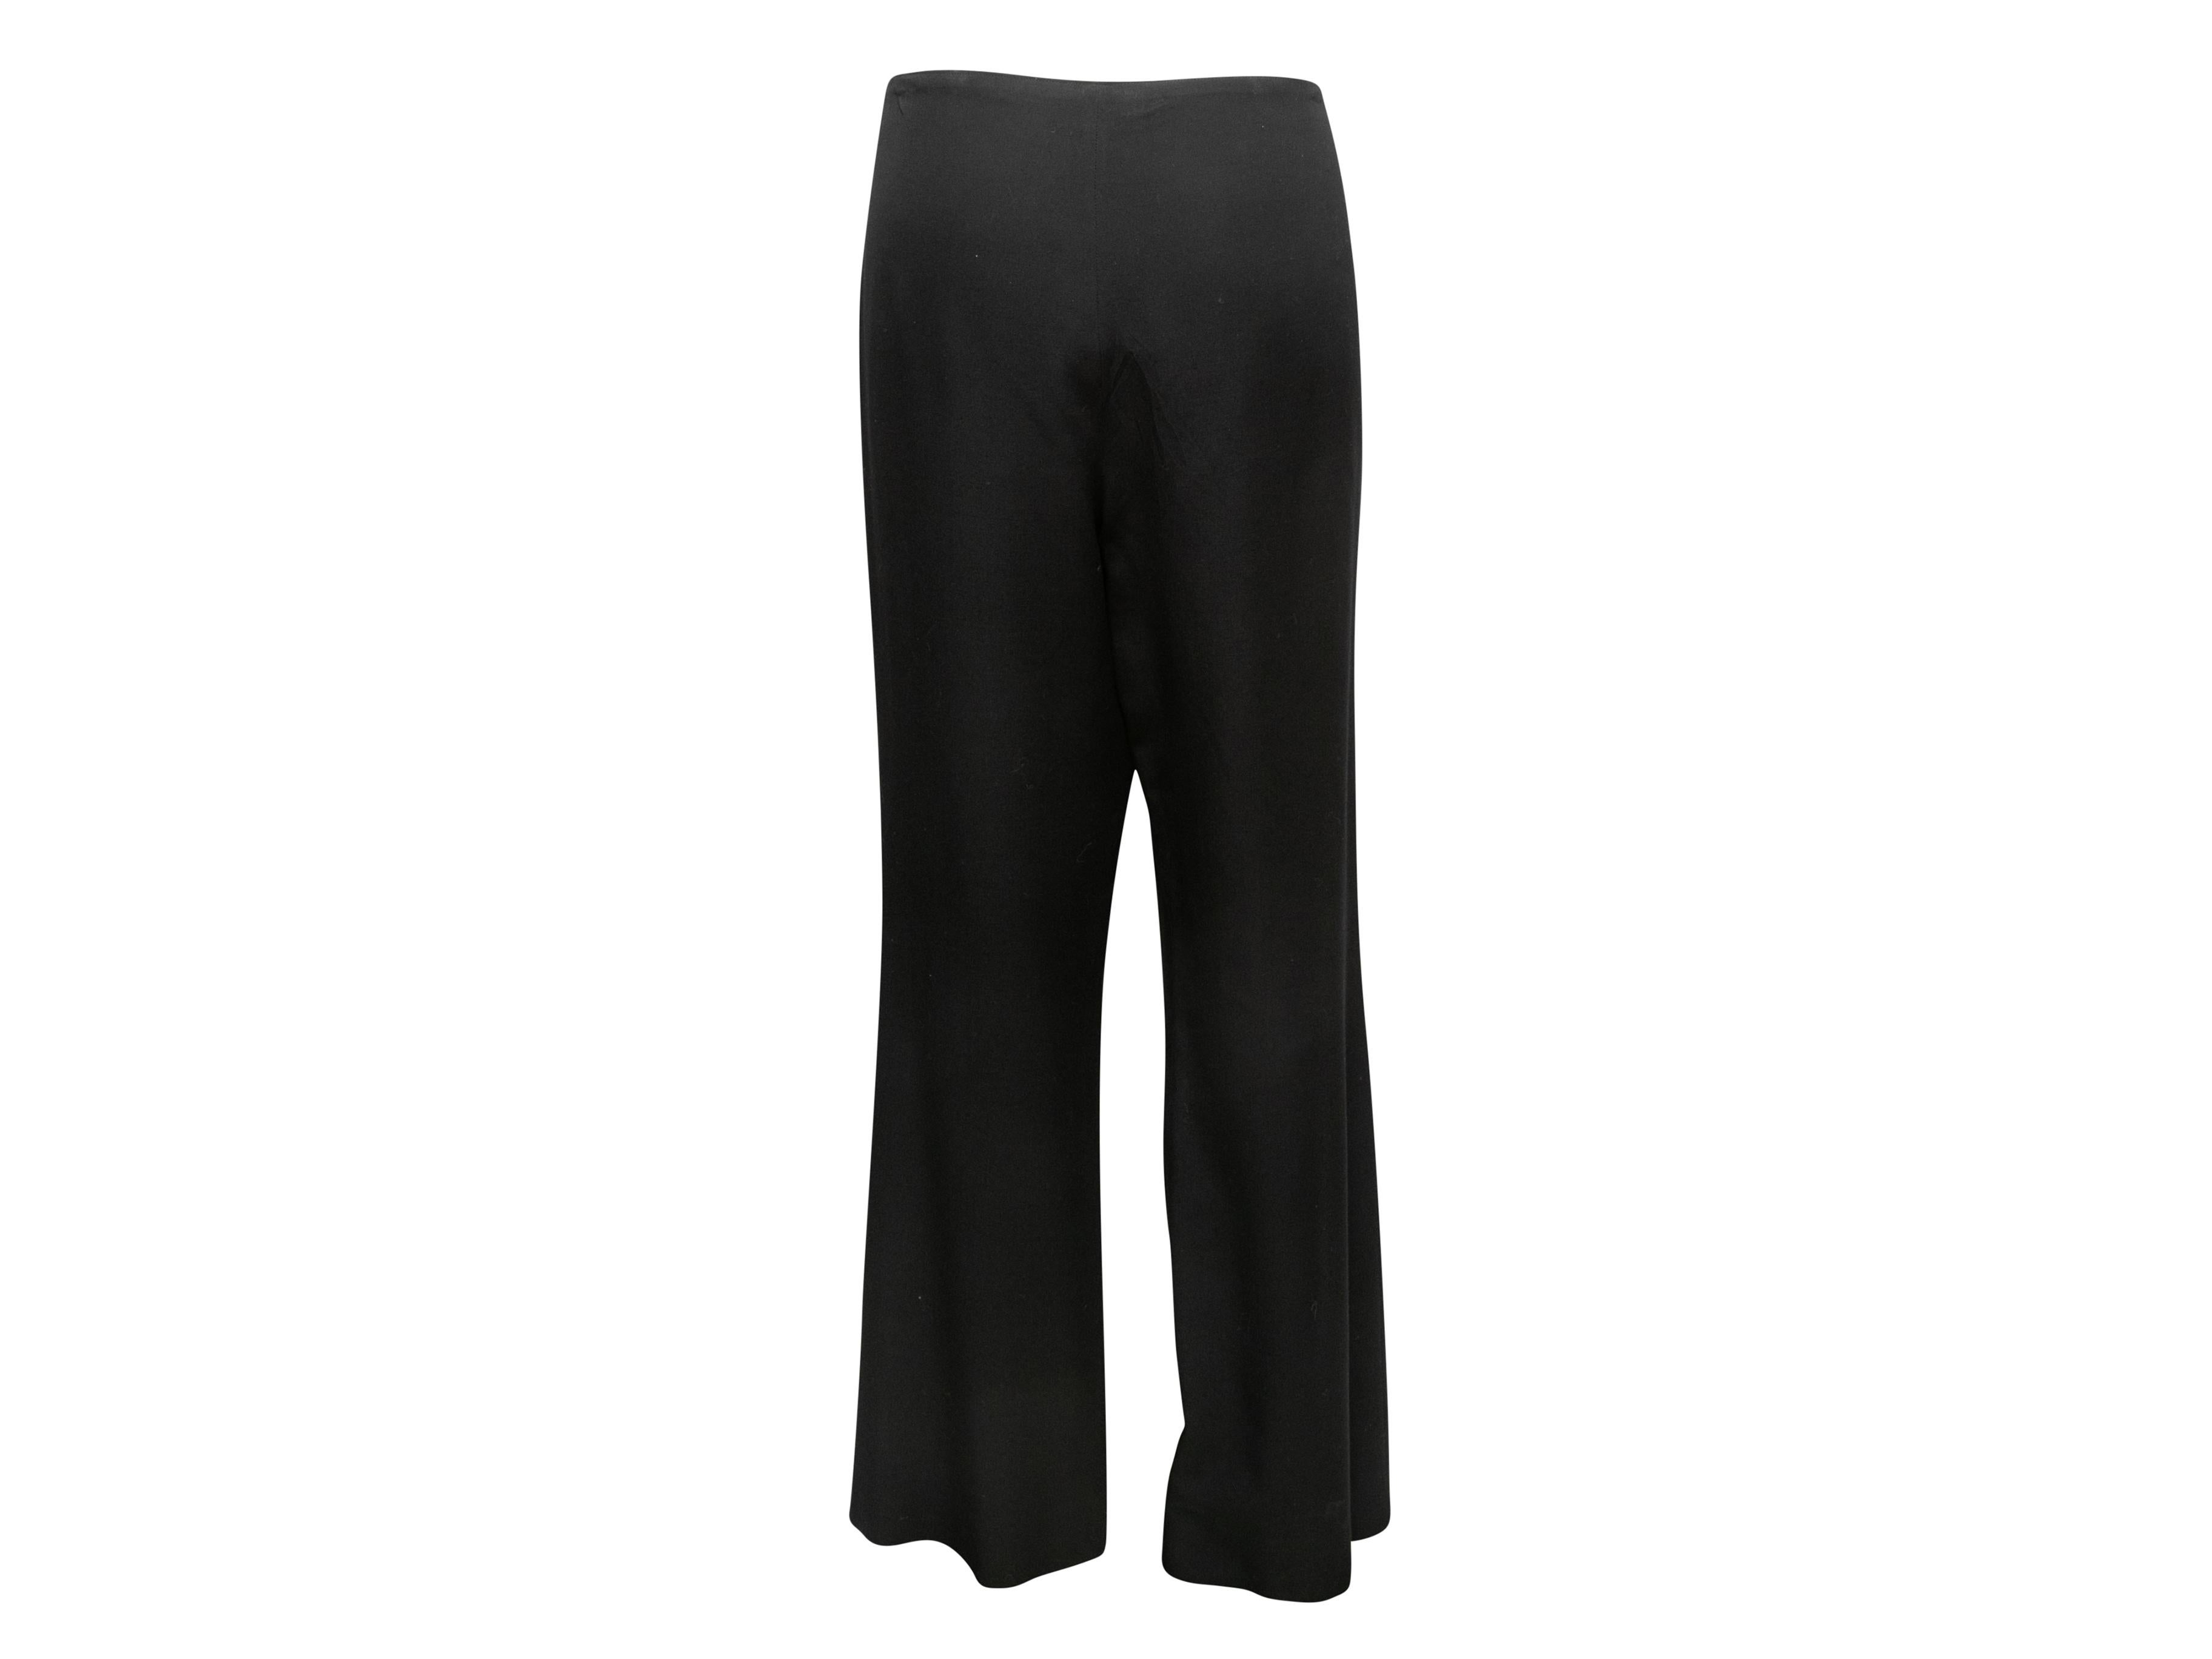 Vintage Black Chanel Fall/Winter 2000 Wool Trousers Size FR 46 In Good Condition For Sale In New York, NY